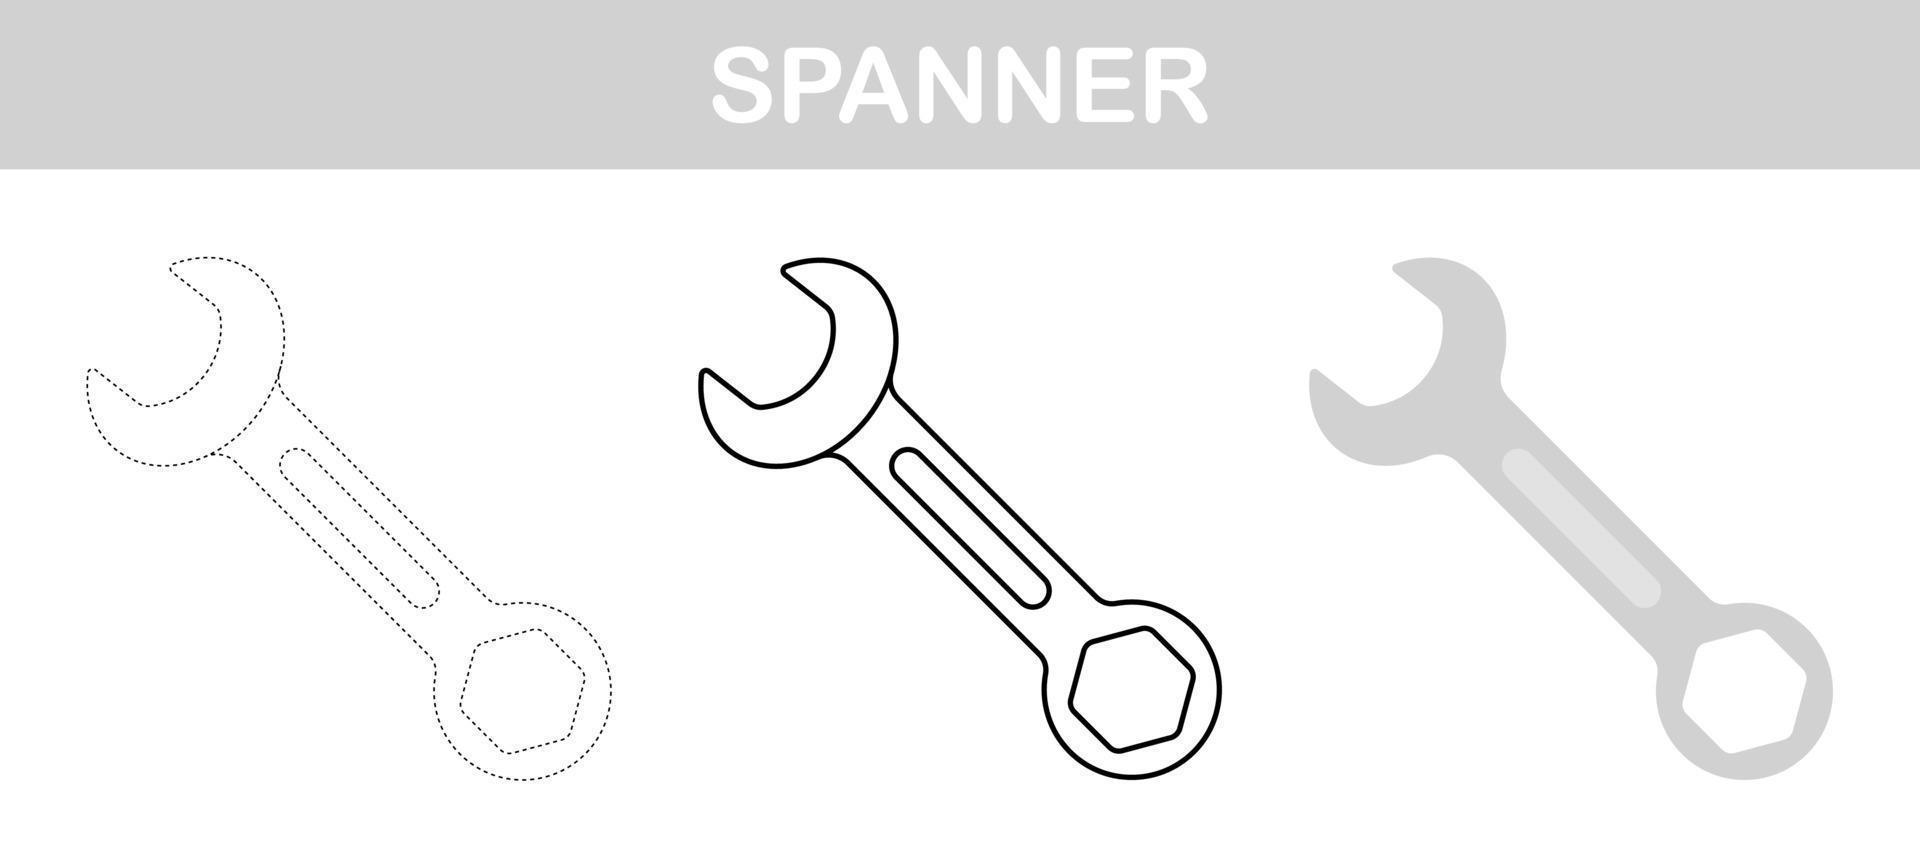 Spanner tracing and coloring worksheet for kids vector